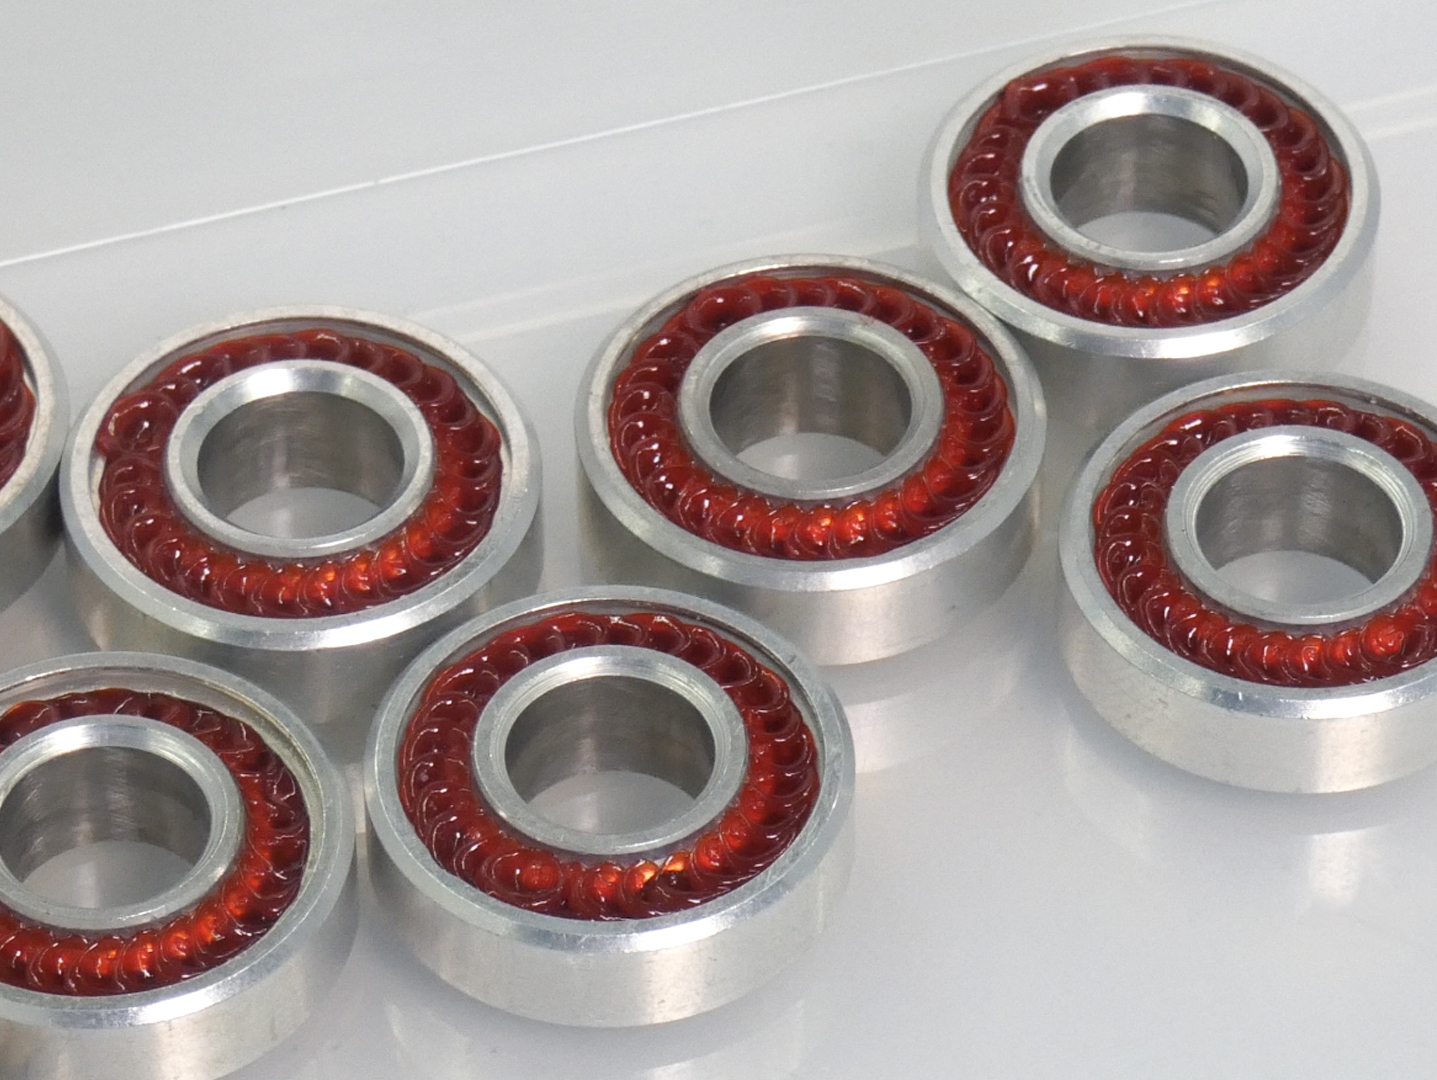 Lubrication of rolling bearings: Project completed ...